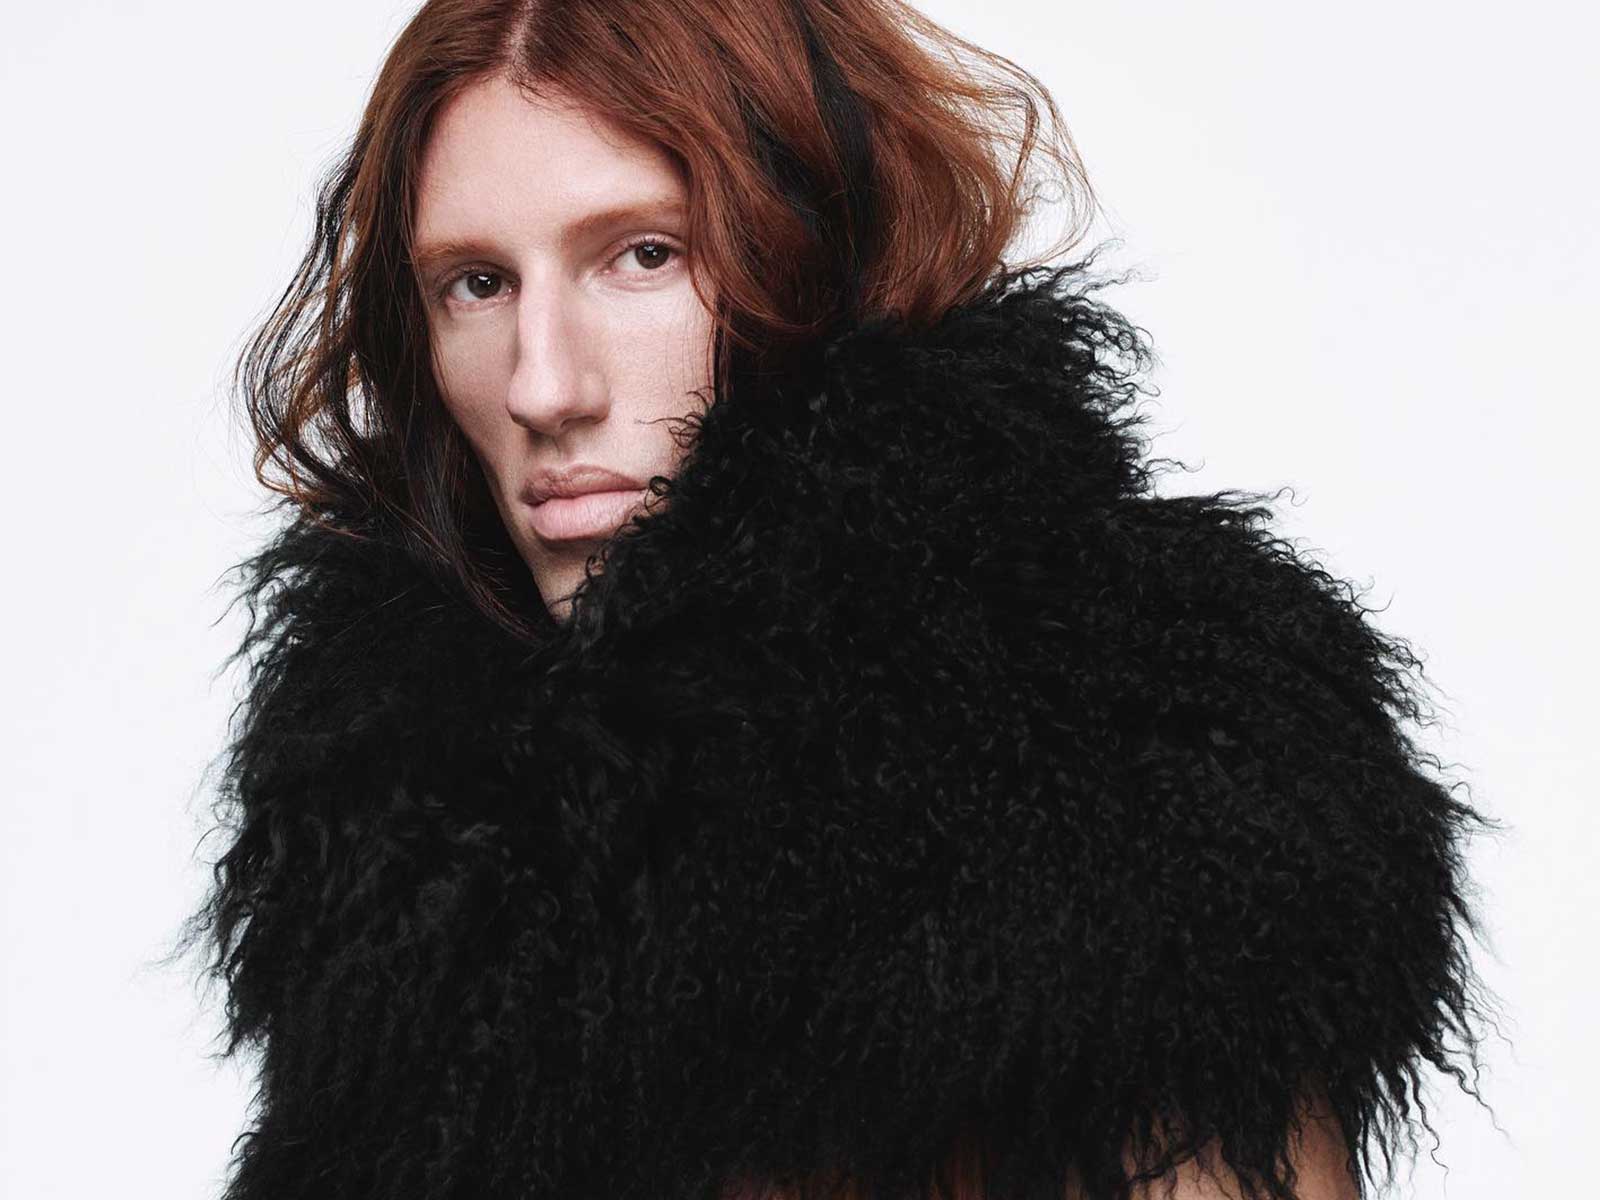 Ludovic de Saint S. is the new creative director of Ann Demeulemeester